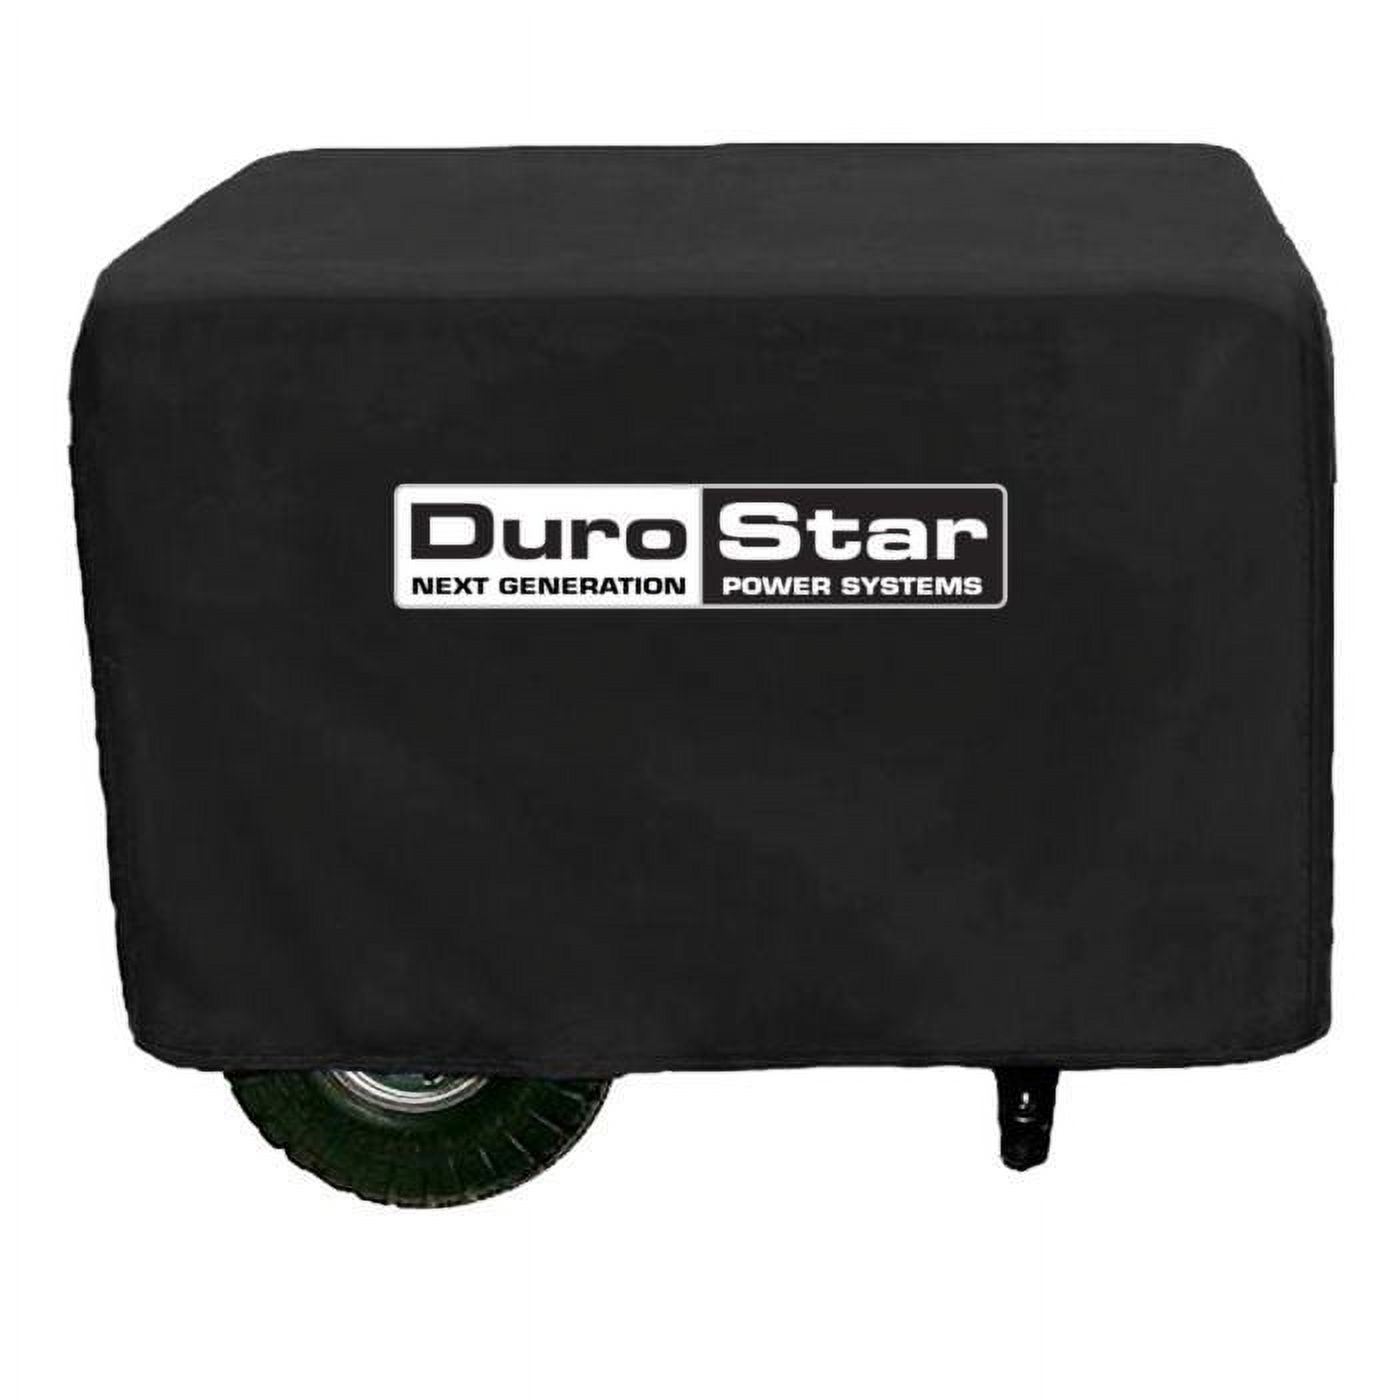 DuroStar DSSGC Small Weather Resistant Portable Generator Cover - image 1 of 2